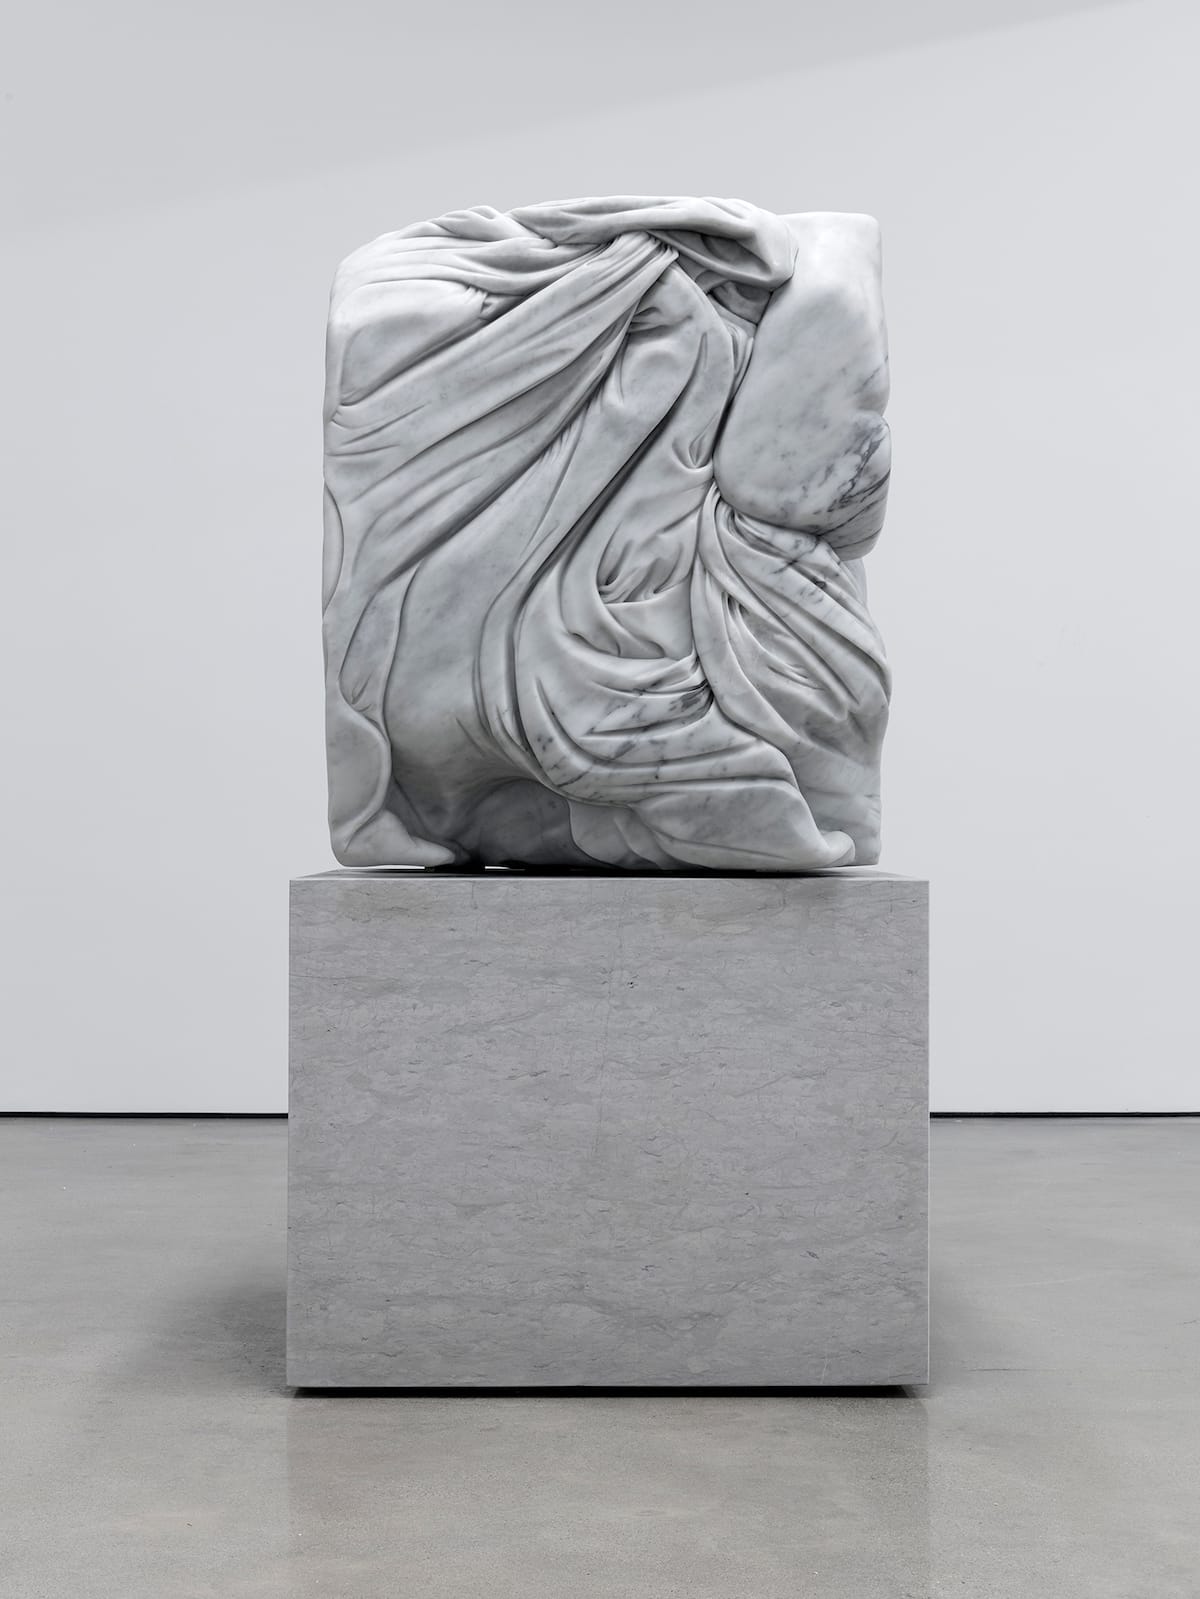 Artist Adam Parker Smith Compresses Classical Sculptures Into Small Marble Cubes (2)